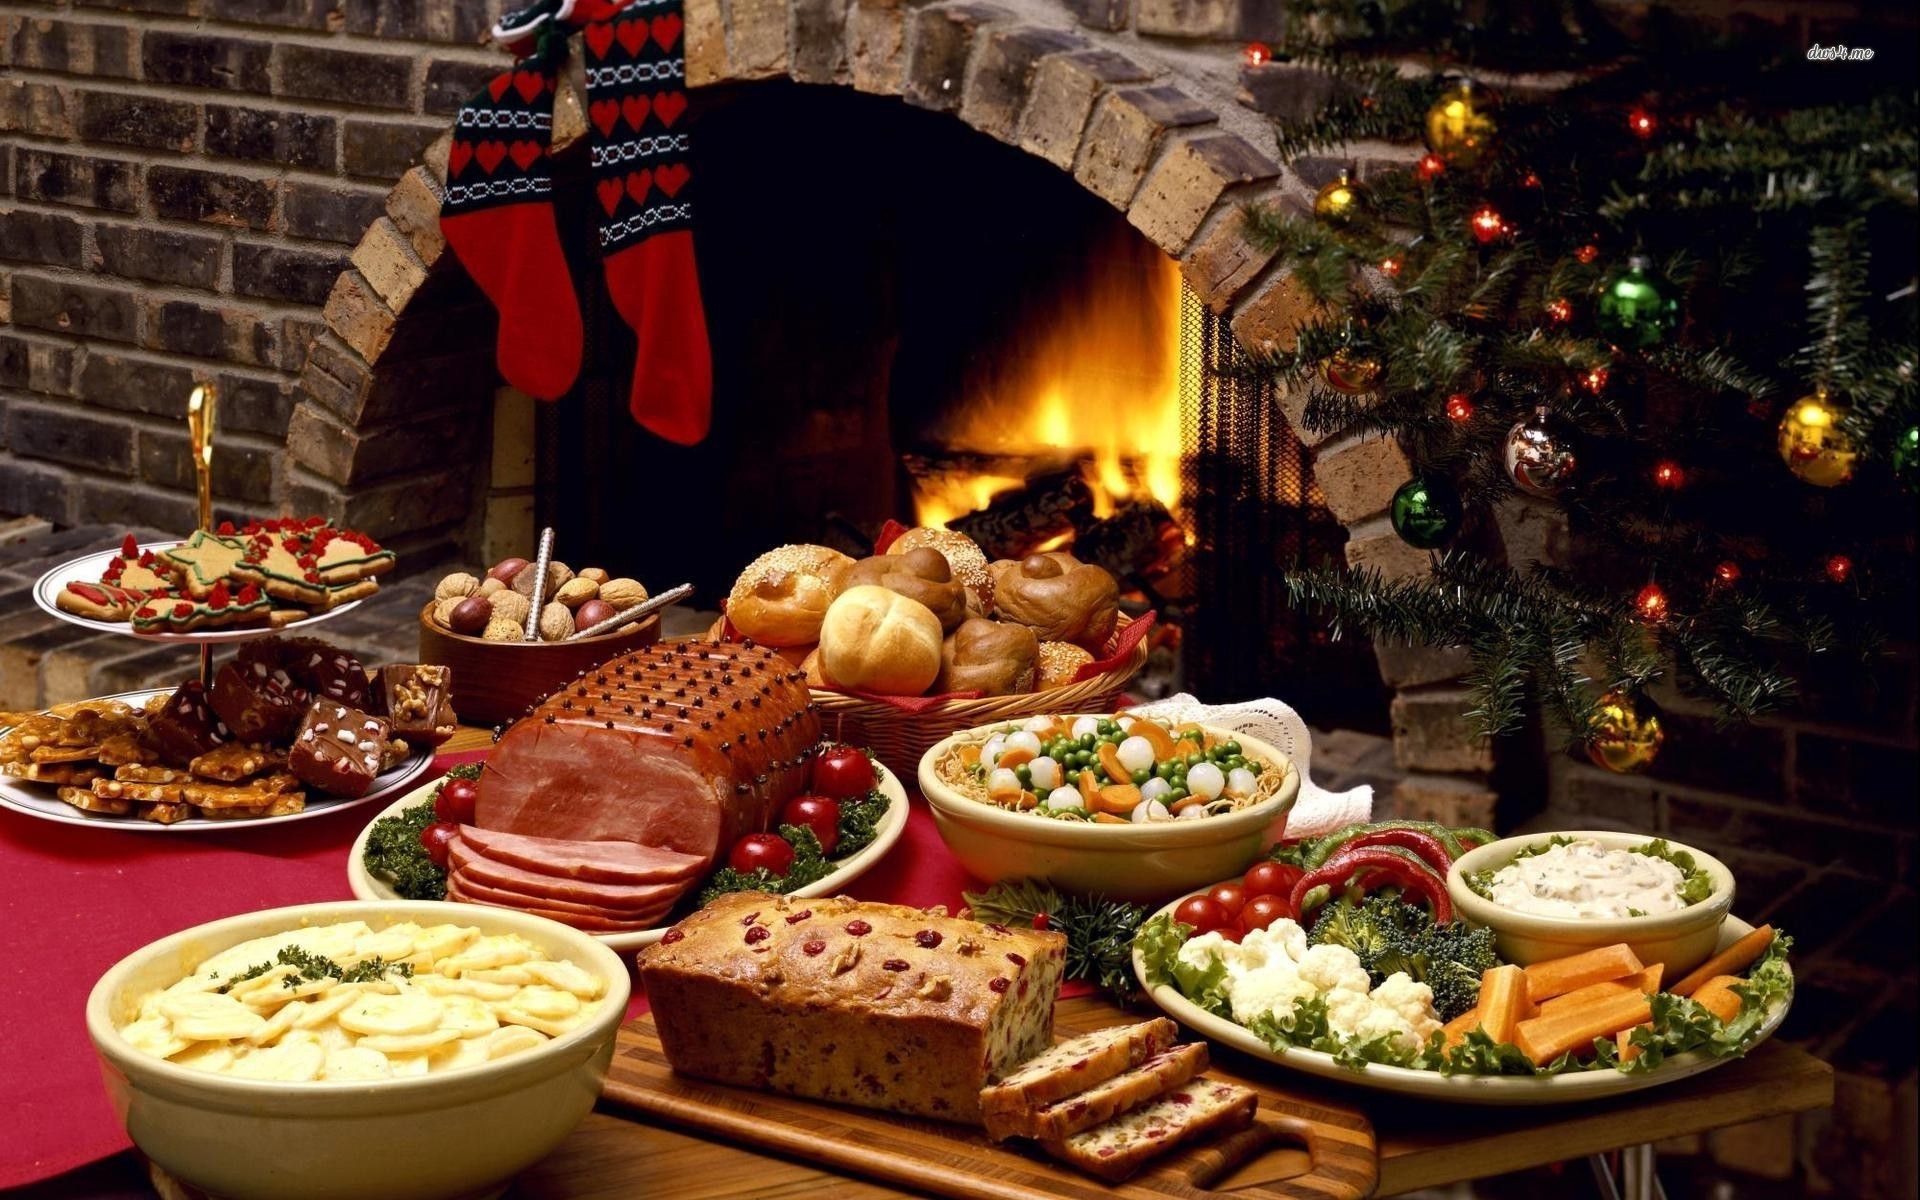 What To Make For Christmas Dinner
 Christmas dinner ideas for a crowd nontraditional menu